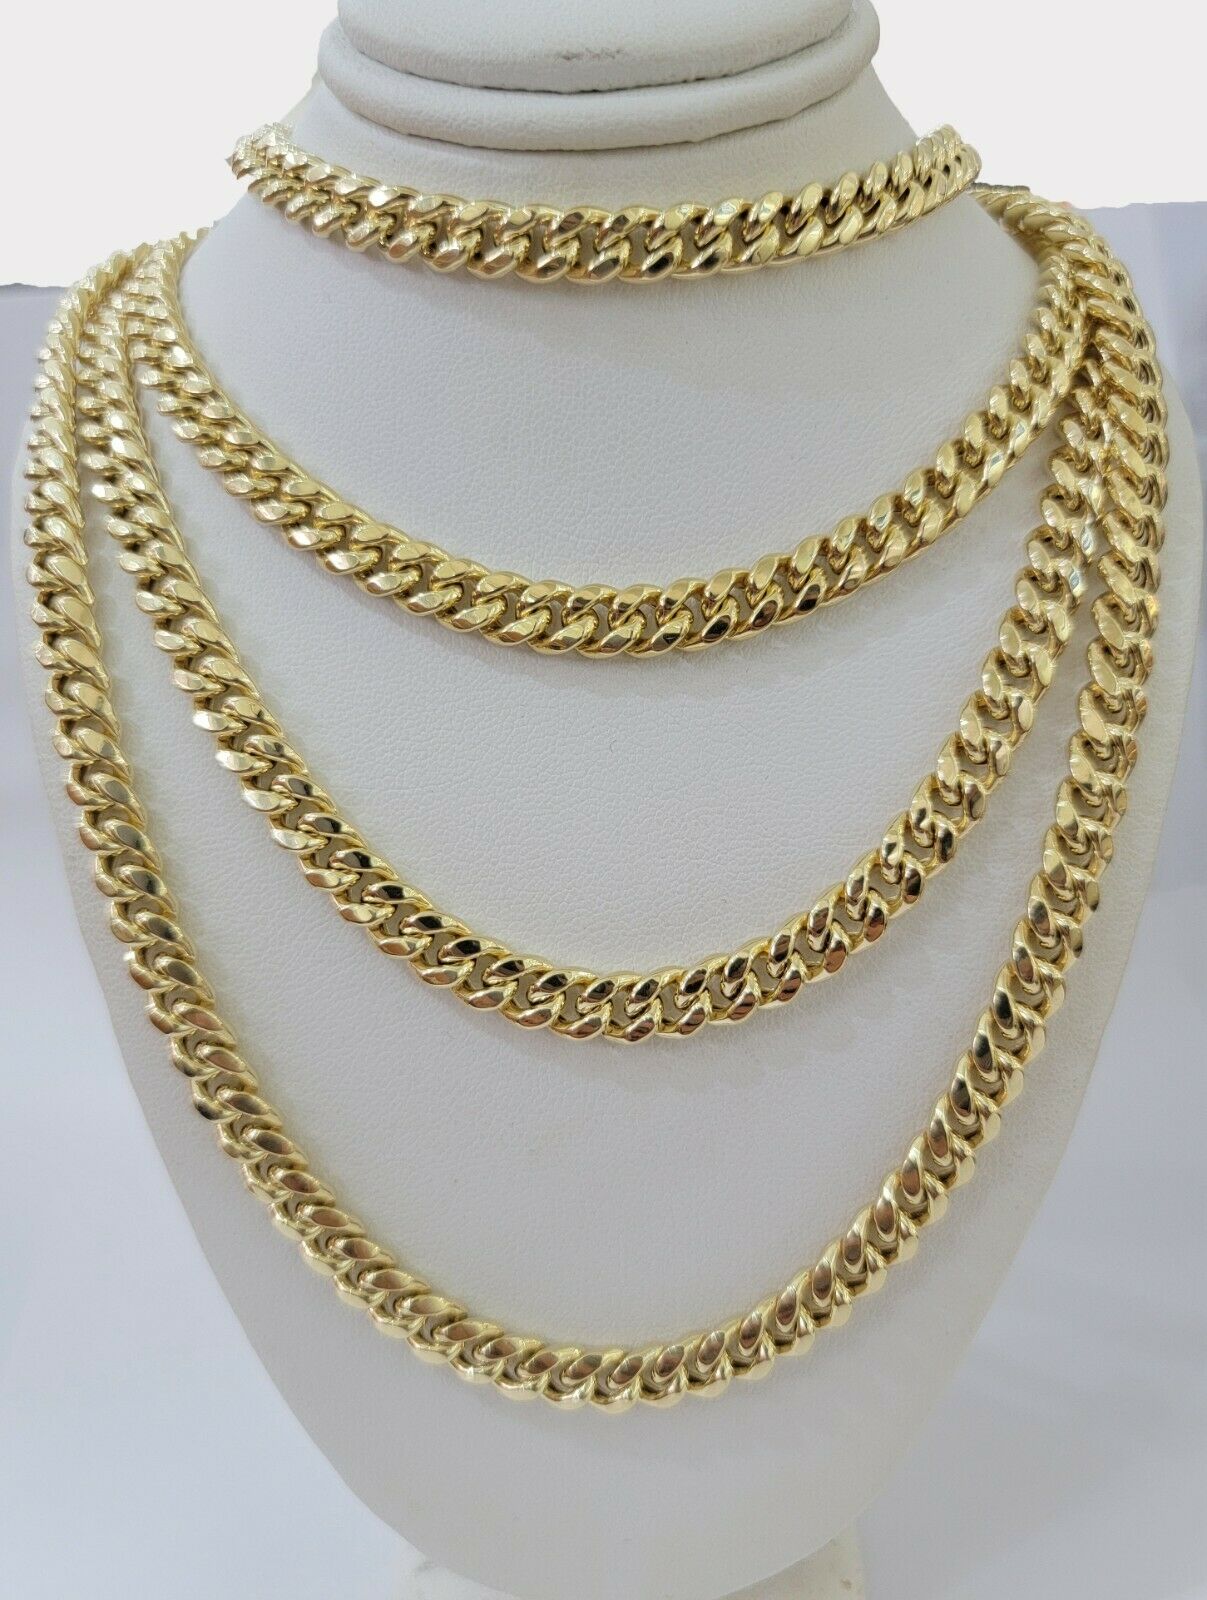 Real Gold Miami Cuban chain Necklace 7mm 24 Inch Lobster ,Men's 10kt Yellow Gold